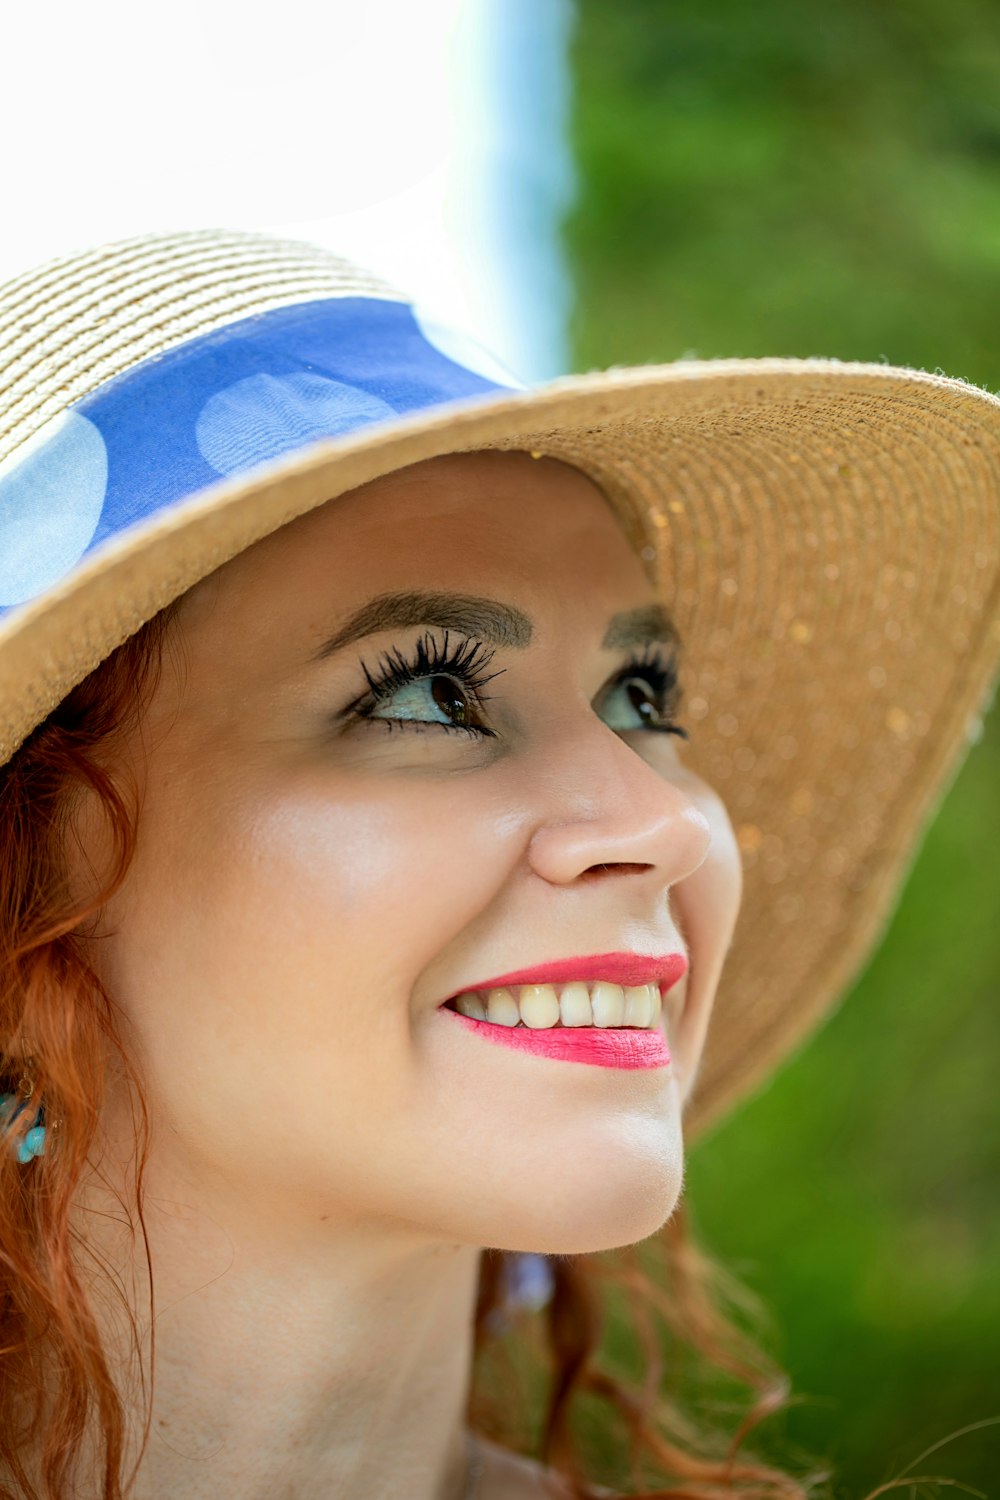 a woman wearing a straw hat and blue dress